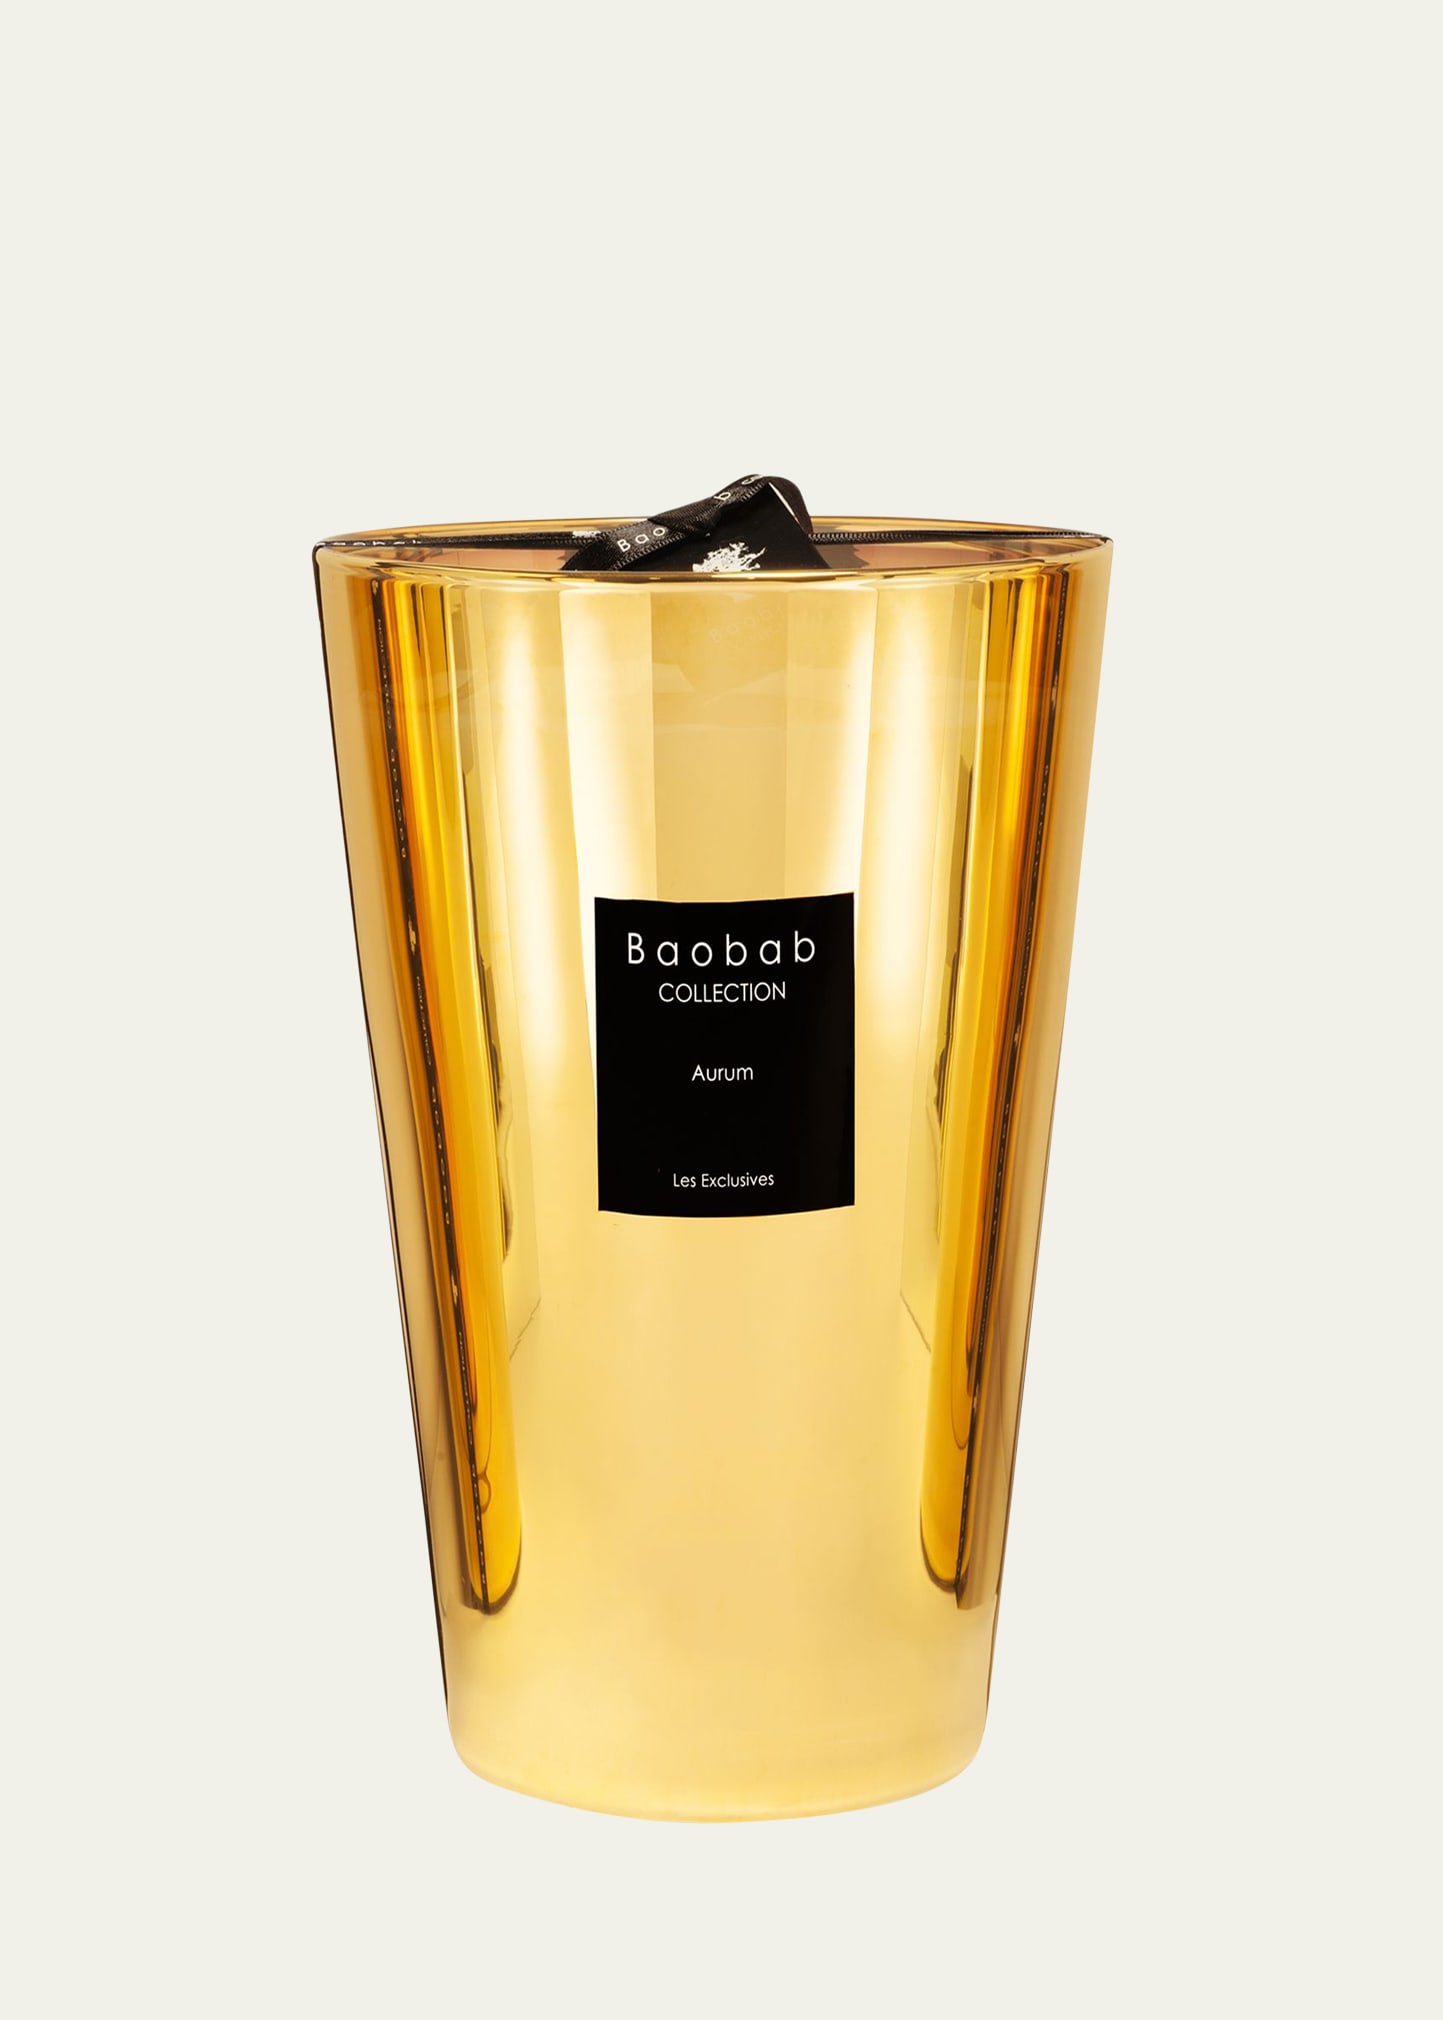 Baobab Collection Aurum Scented Candle, 9.4"